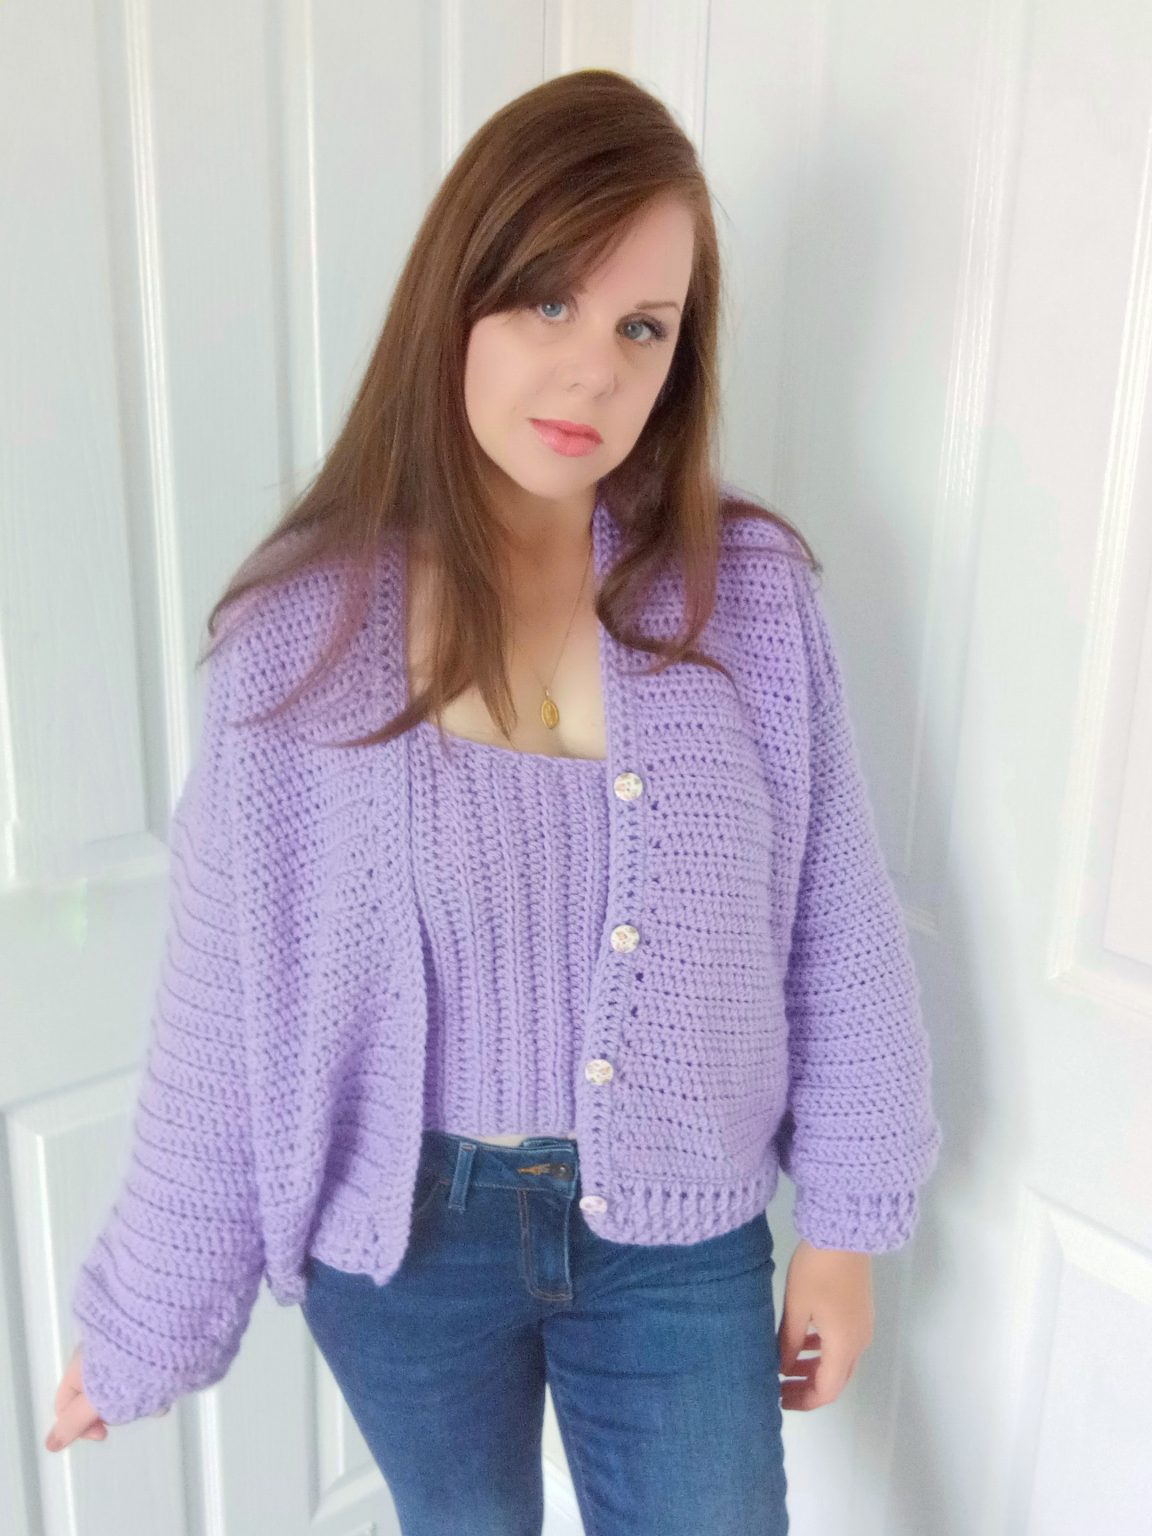 Crochet The Sweet Lilac Cardigan by Selina Veronique